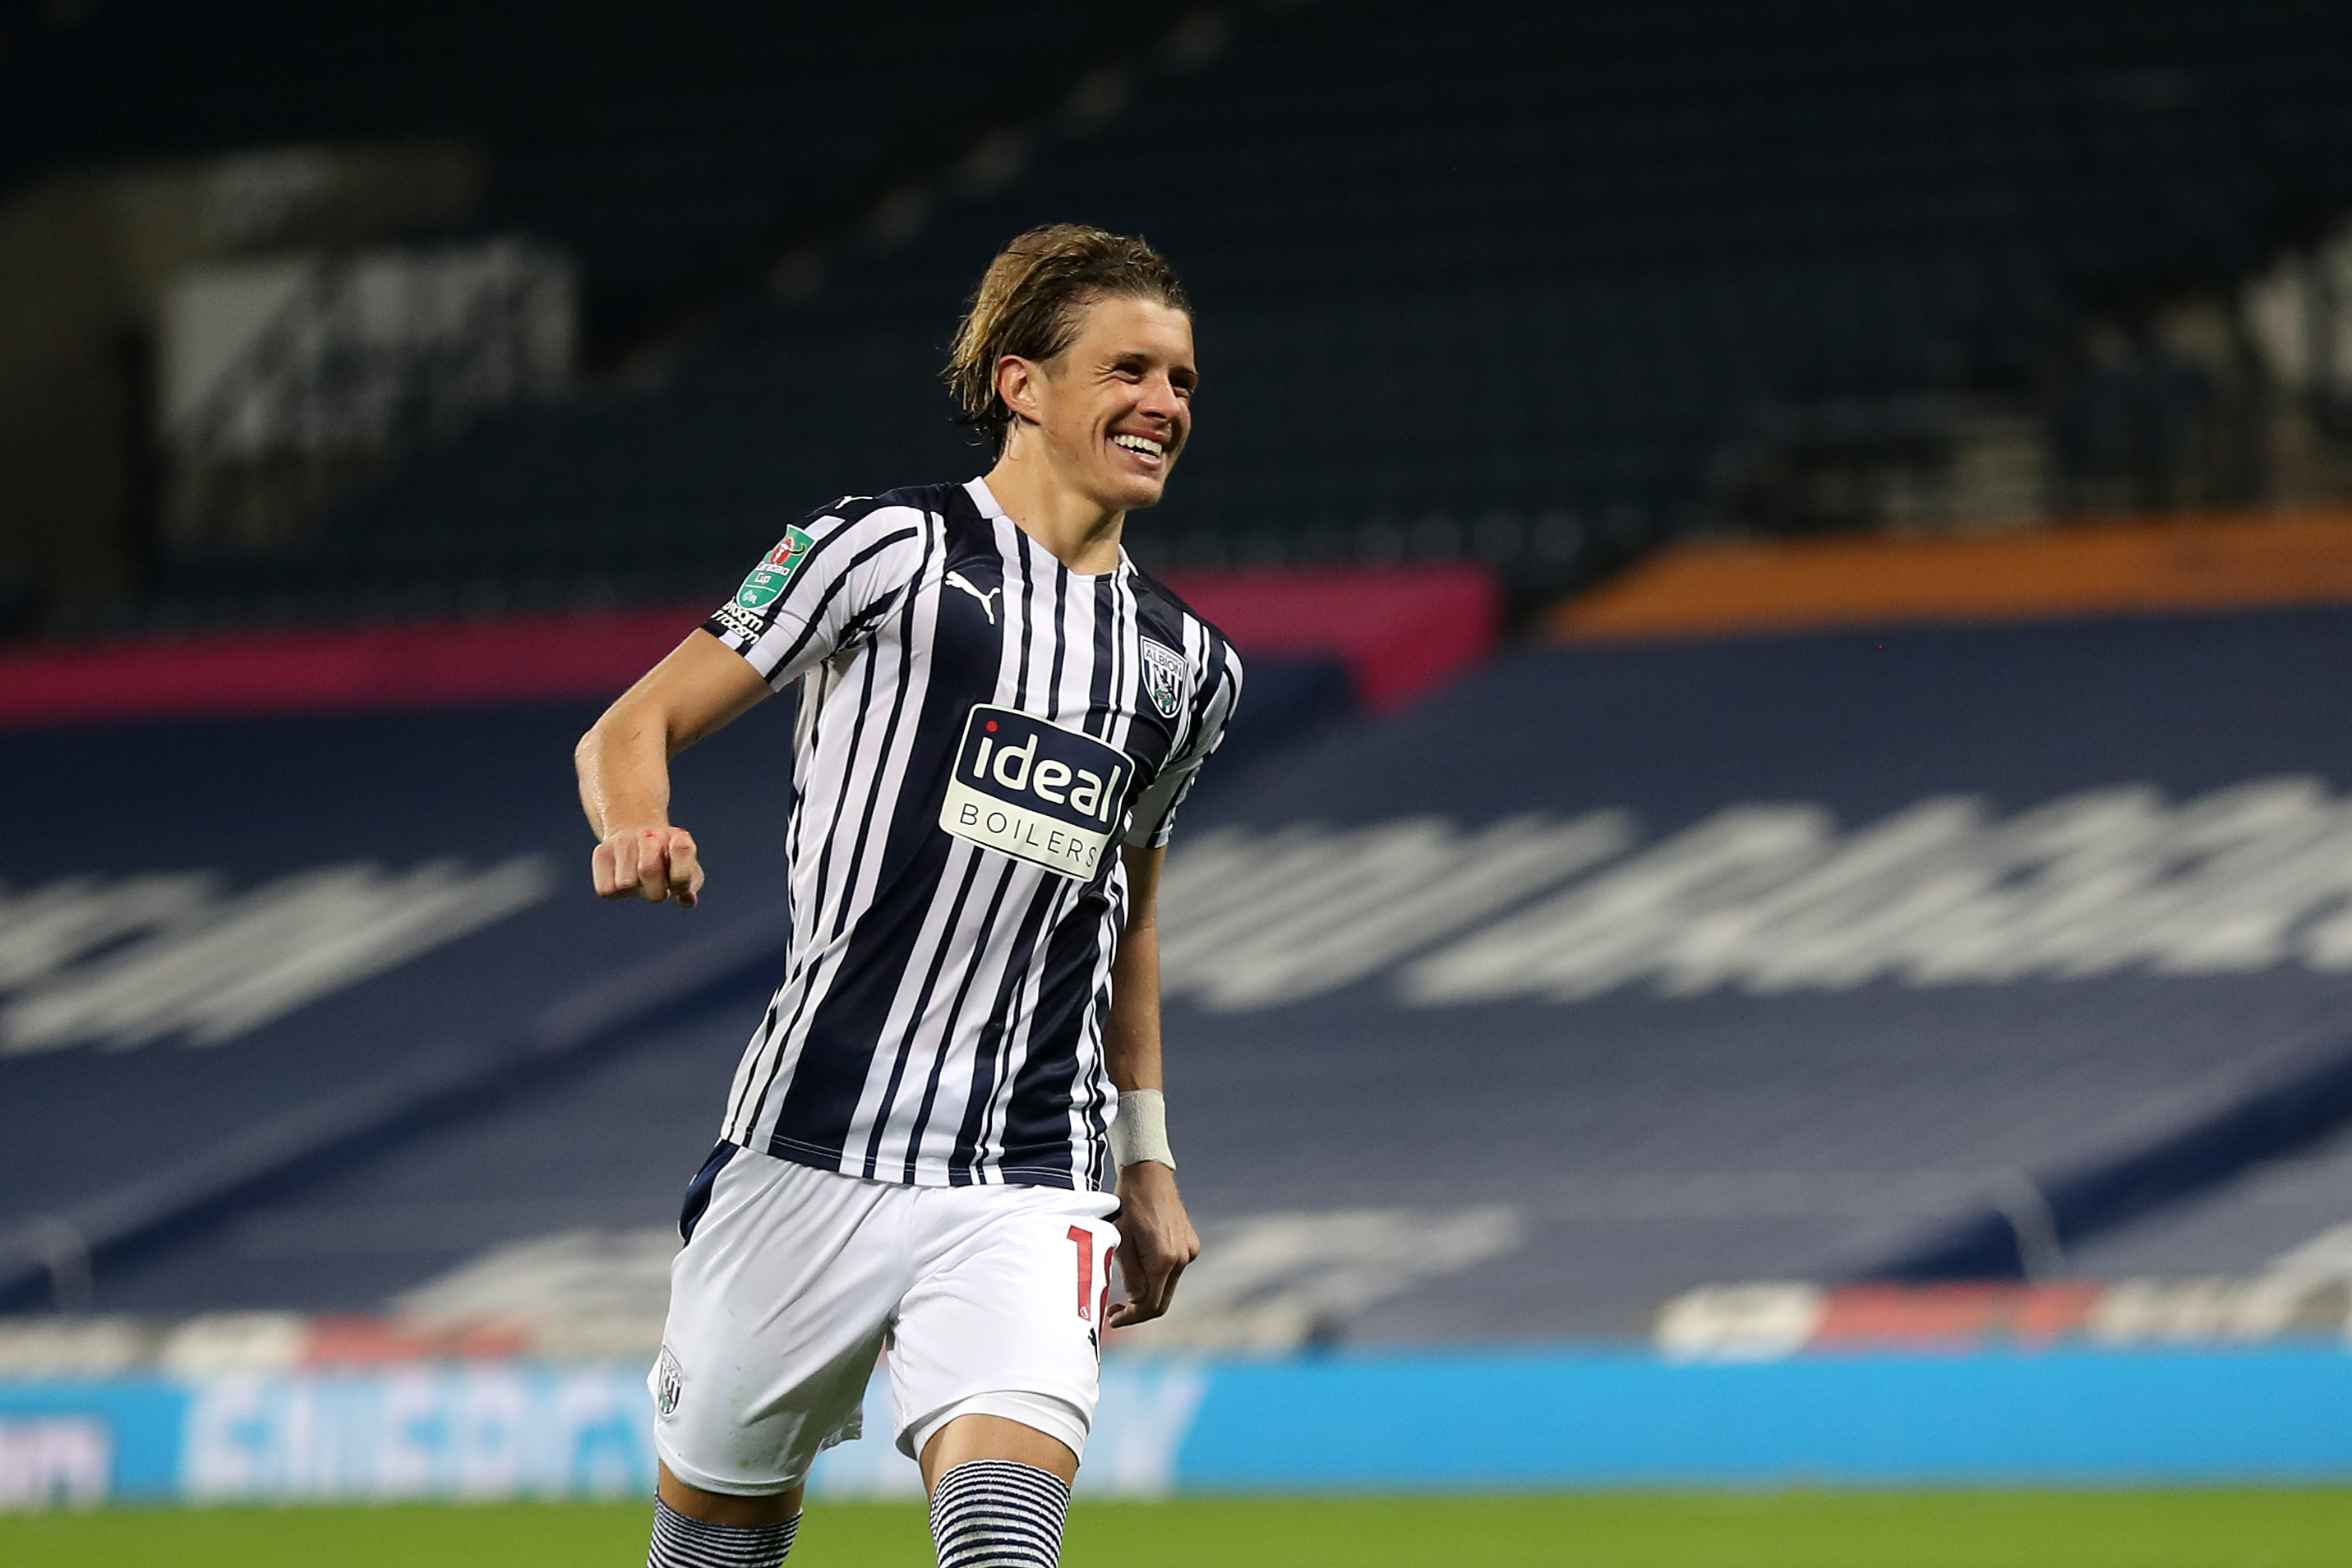 Conor Gallagher wins West Bromwich Albion Young Player of the Season award  - We Ain't Got No History